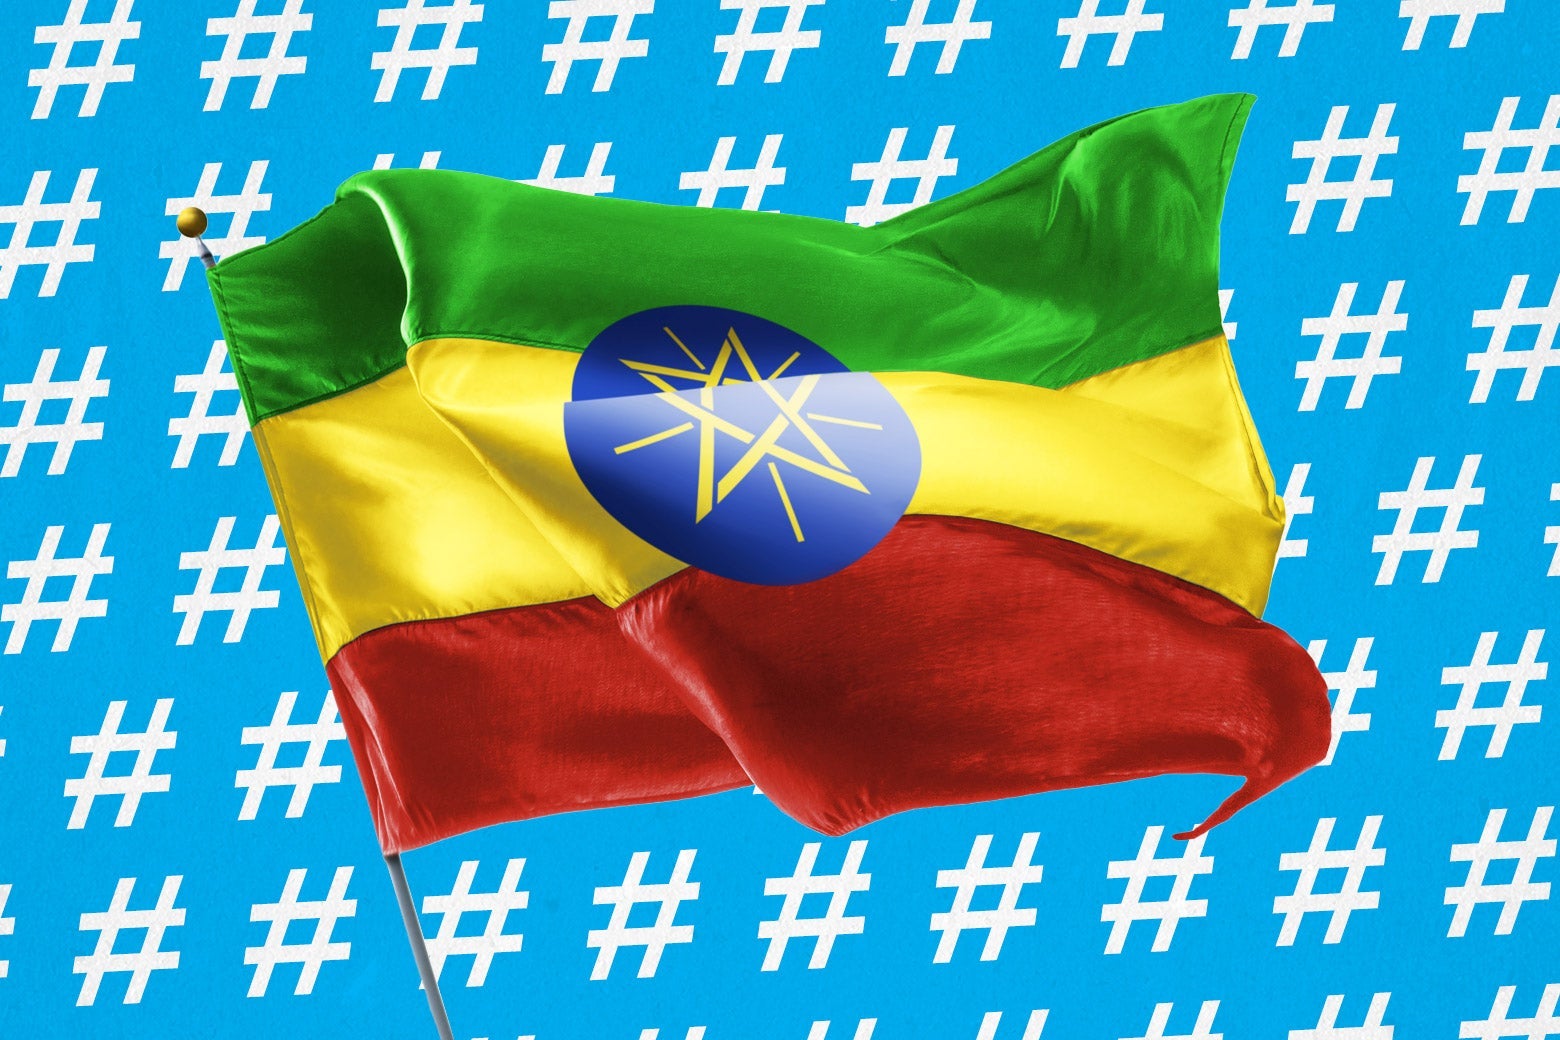 An Ethiopian flag surrounded by hashtags.